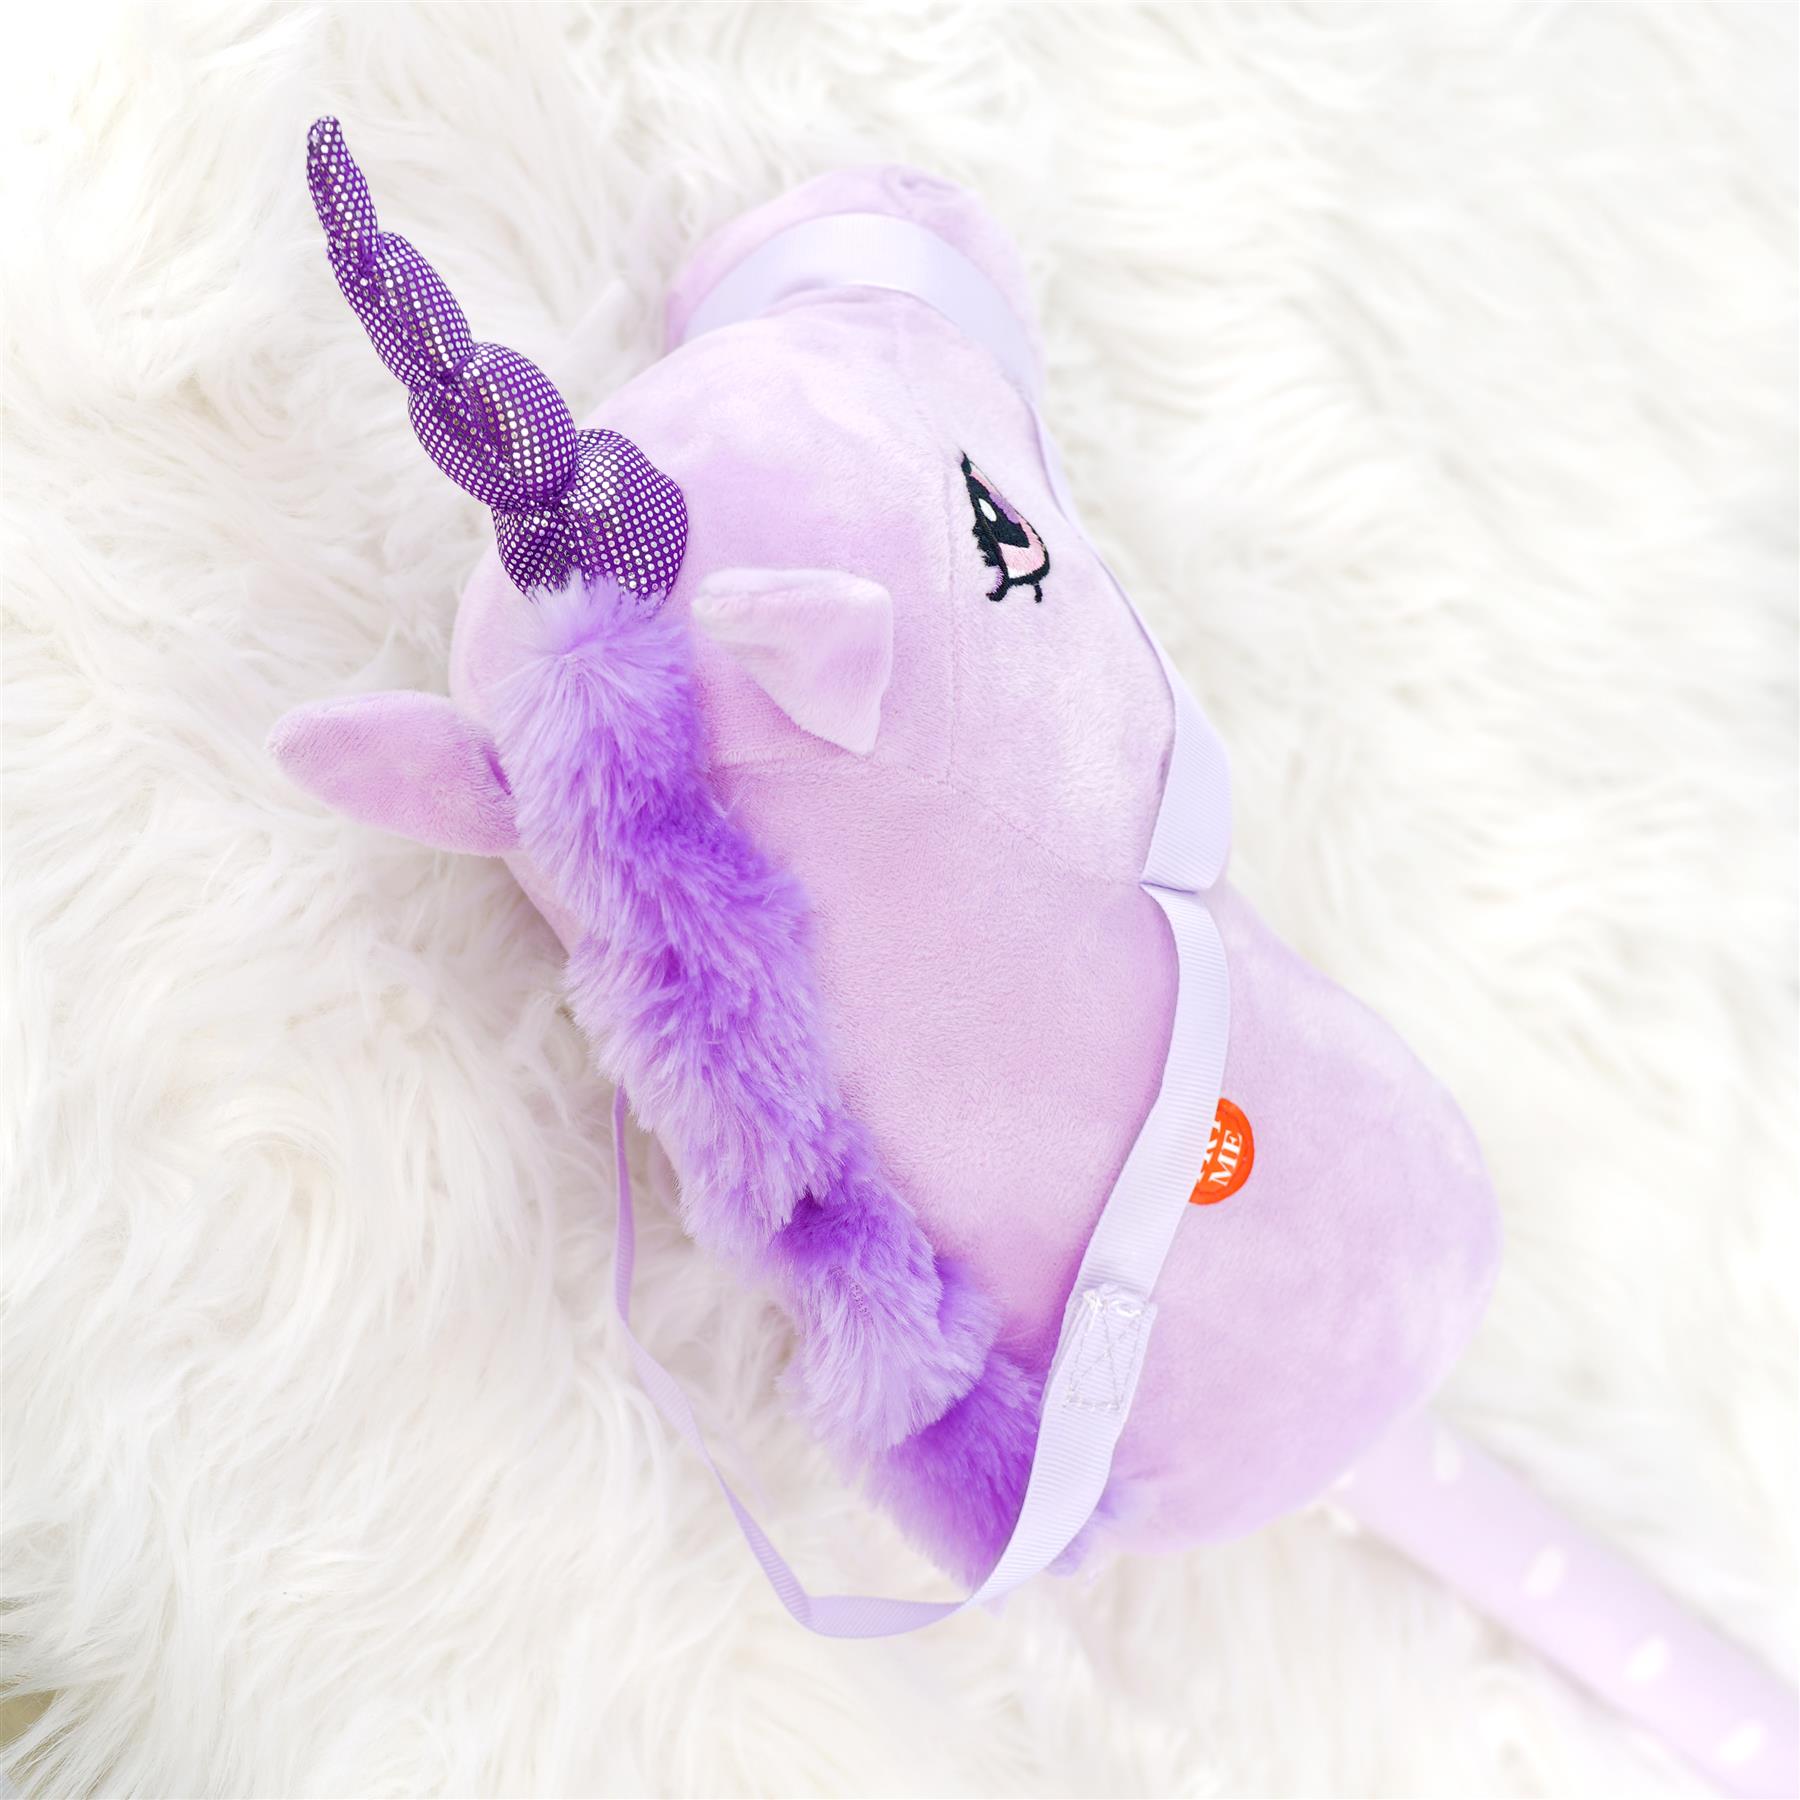 Lilac Hobby Horse by The Magic Toy Shop - The Magic Toy Shop